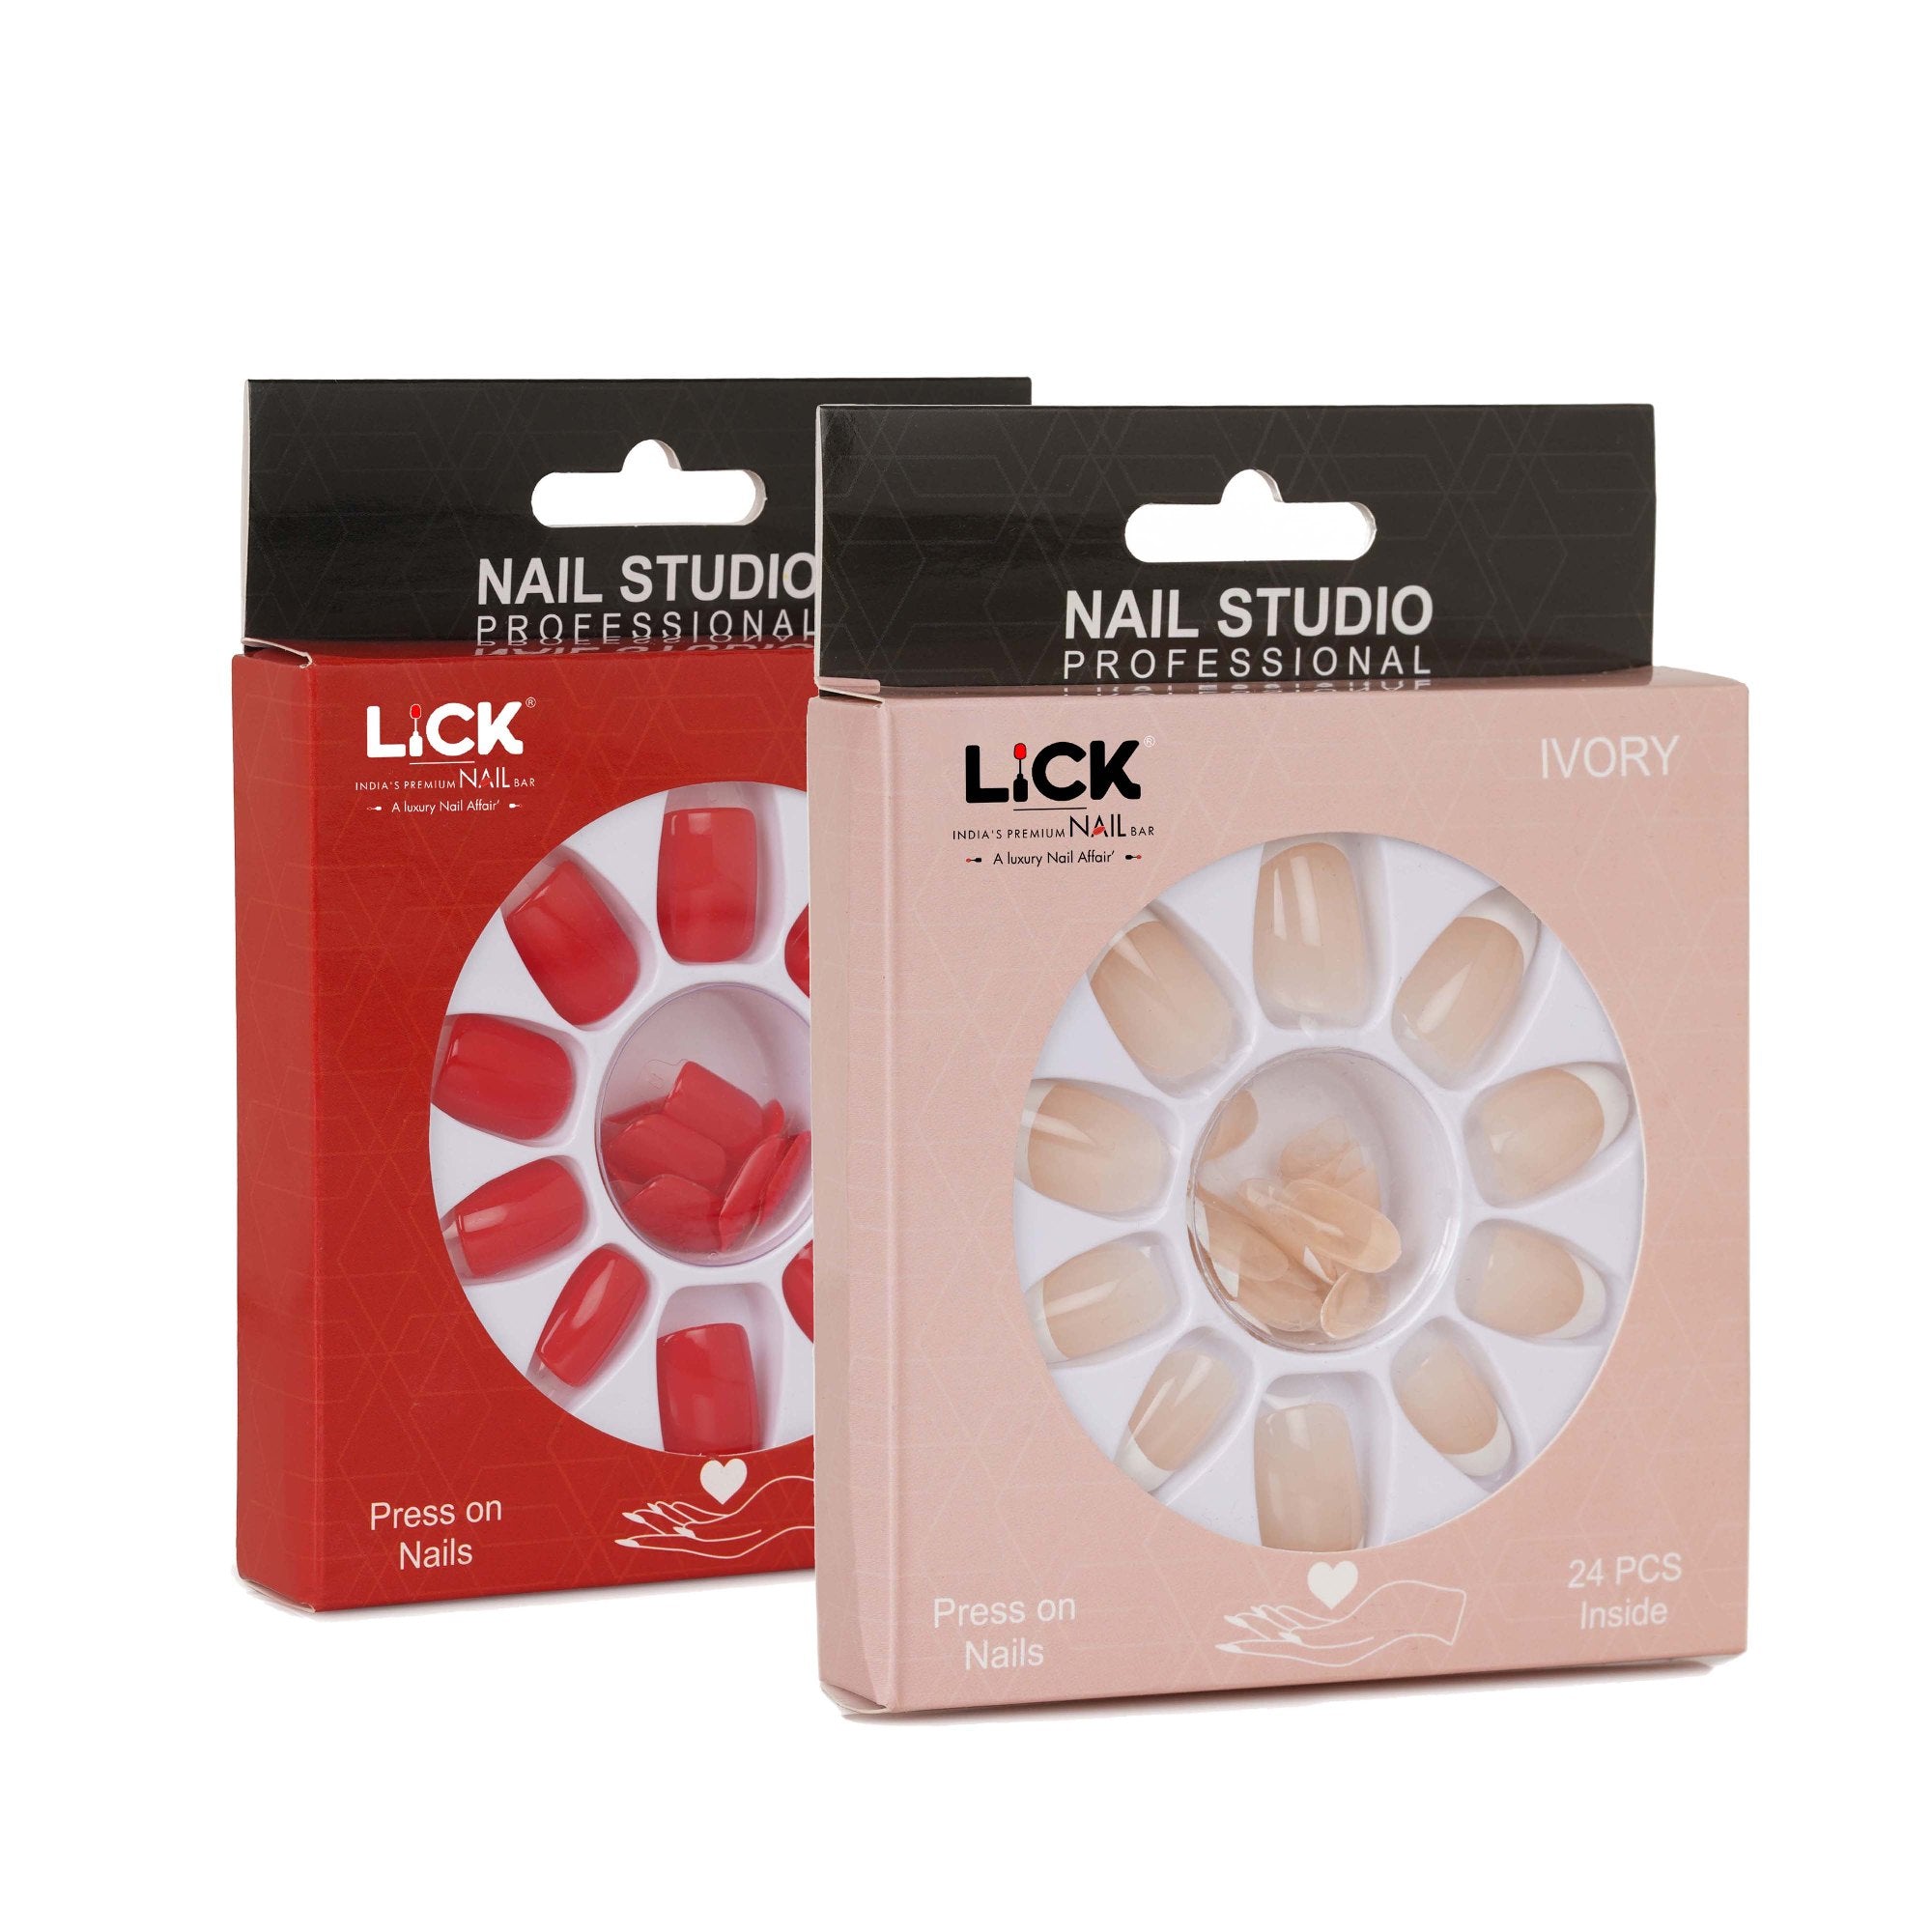 Lick Nails Acrylic Press on Nails With Application Kit, Combo of 2, 24 Pcs Per Pack